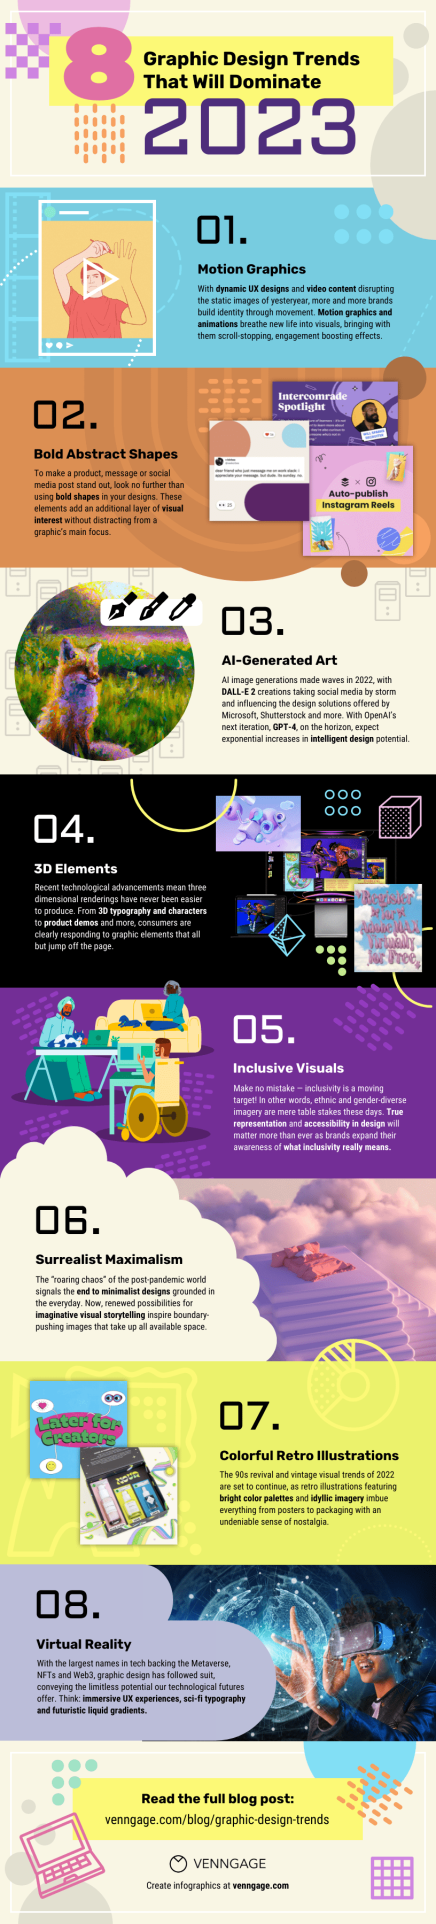 List Of Graphic Design Trends That Will Dominate 2023